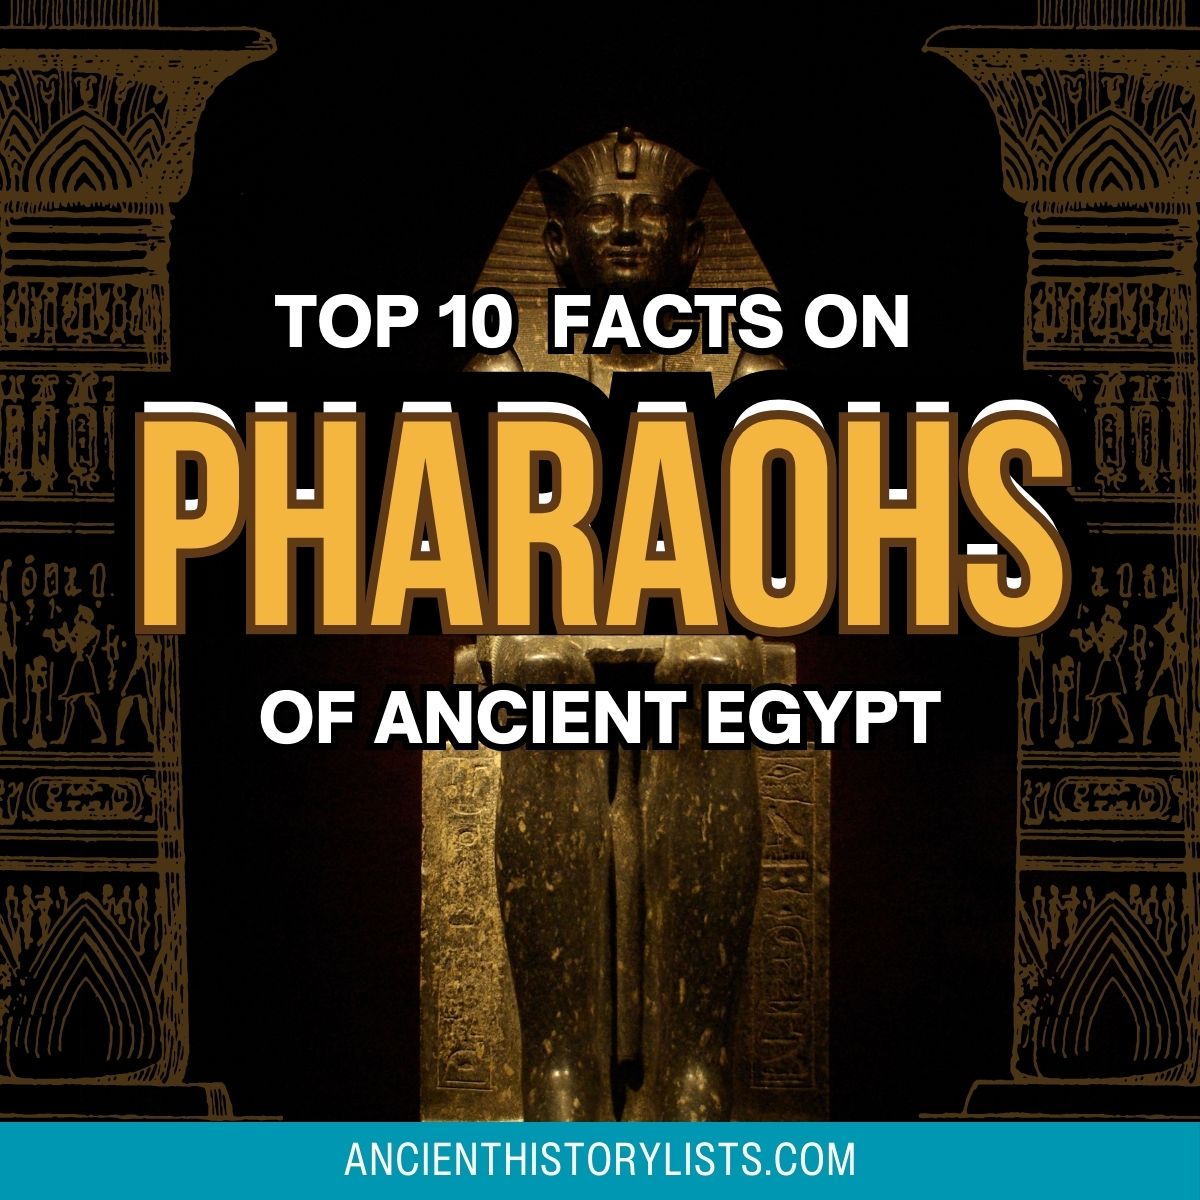 Fascinating Facts about the Pharaohs of Ancient Egypt